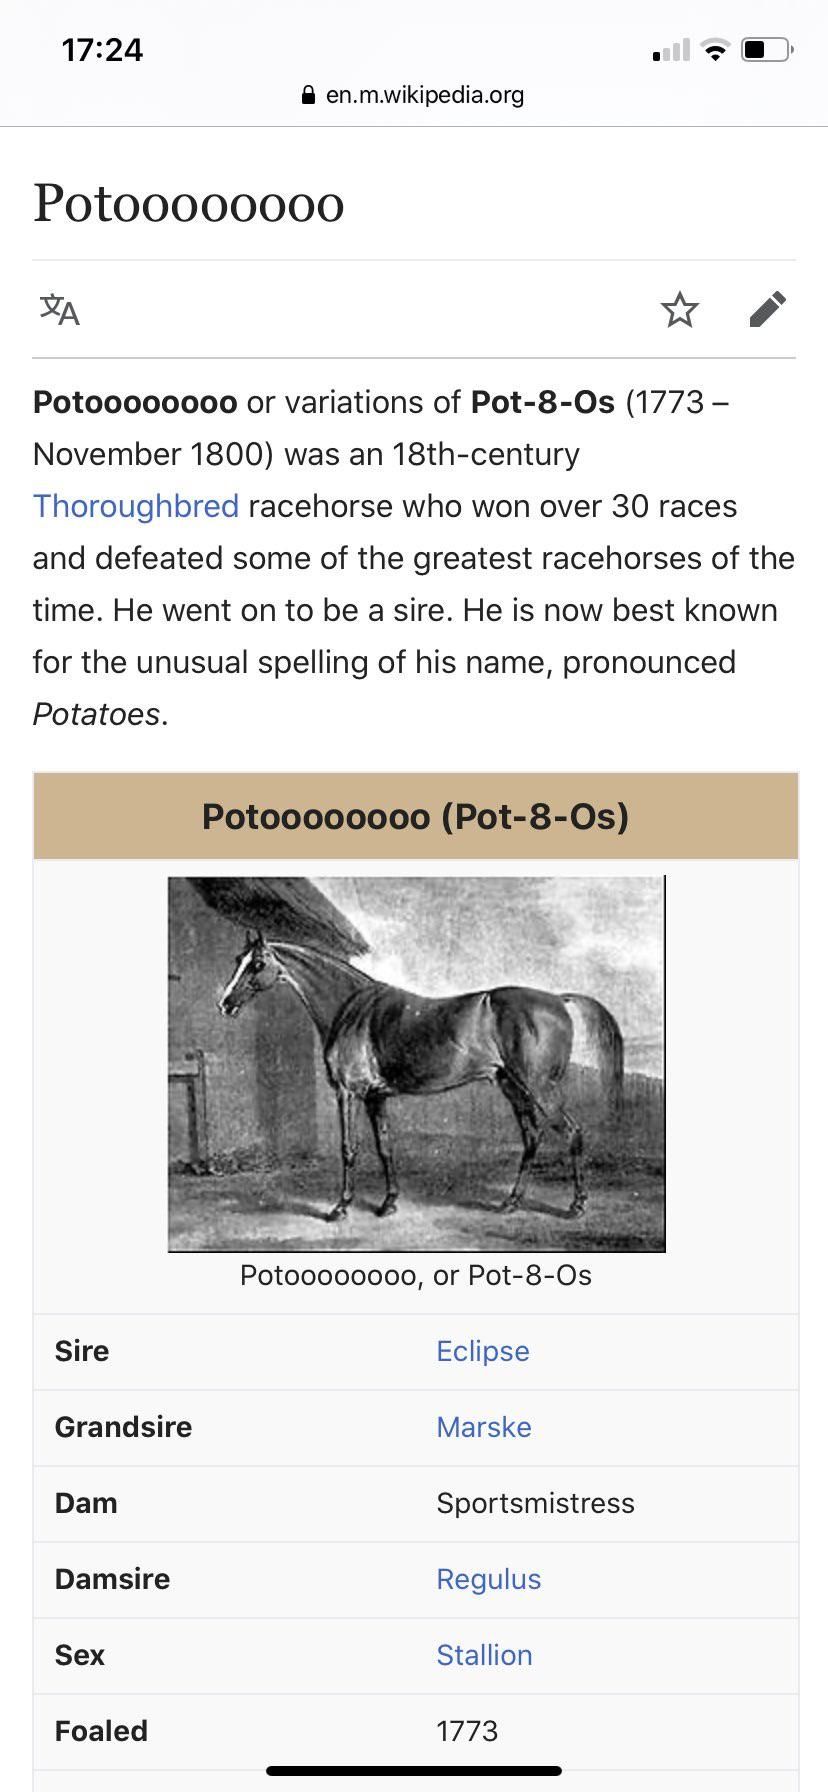 This horse is a great reminder that our generation did not invent shitposting, it merely adapted it to another form